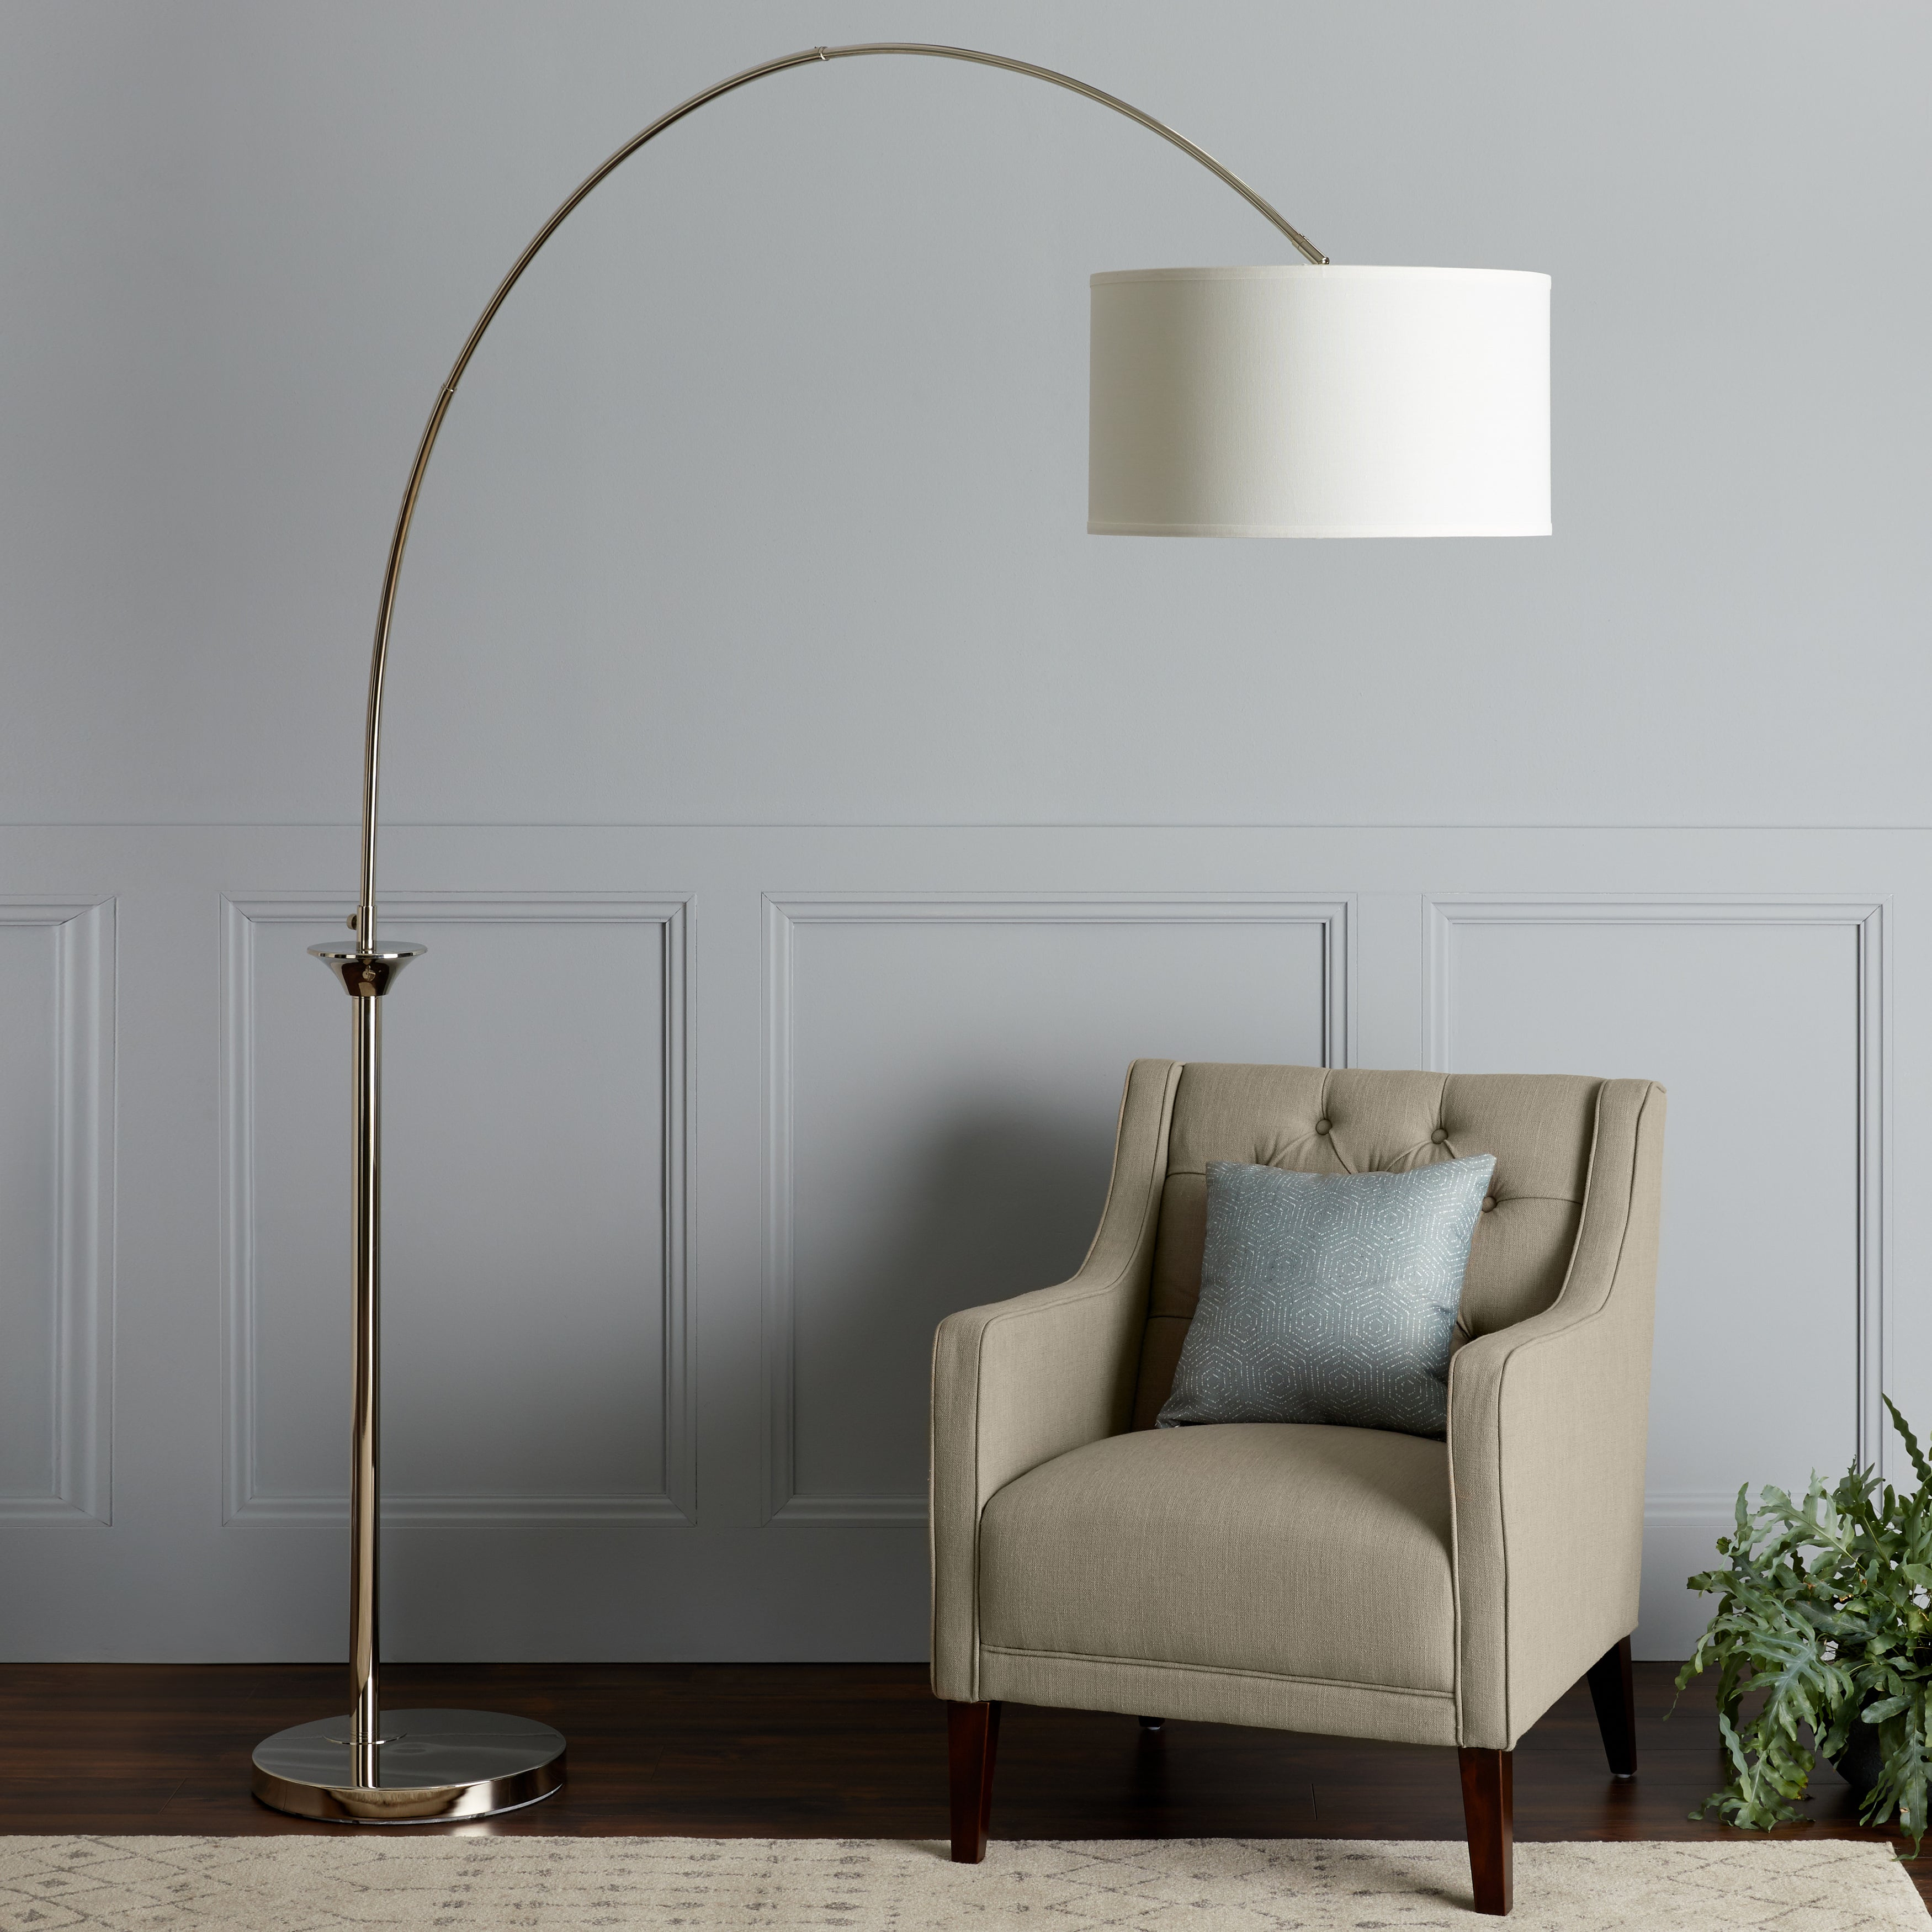 Floor Lamps Arc throughout sizing 3500 X 3500